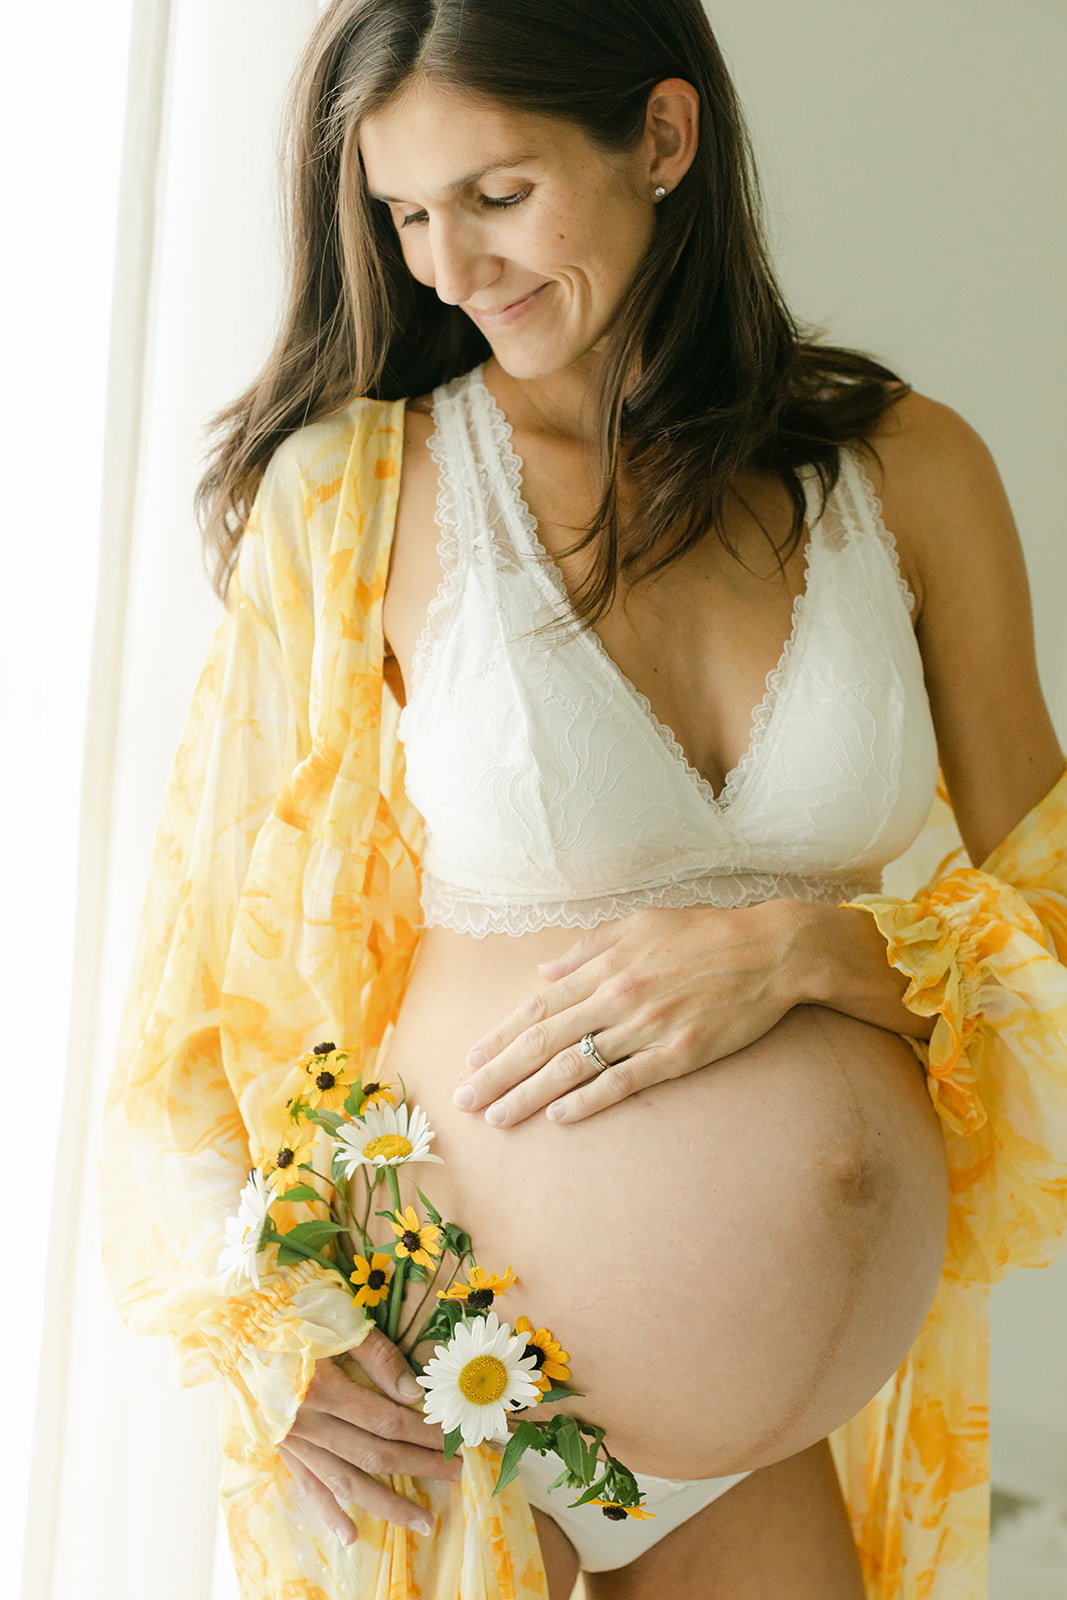 body empowerment and maternity session in nashville studio. mama holding wild flower bouquet